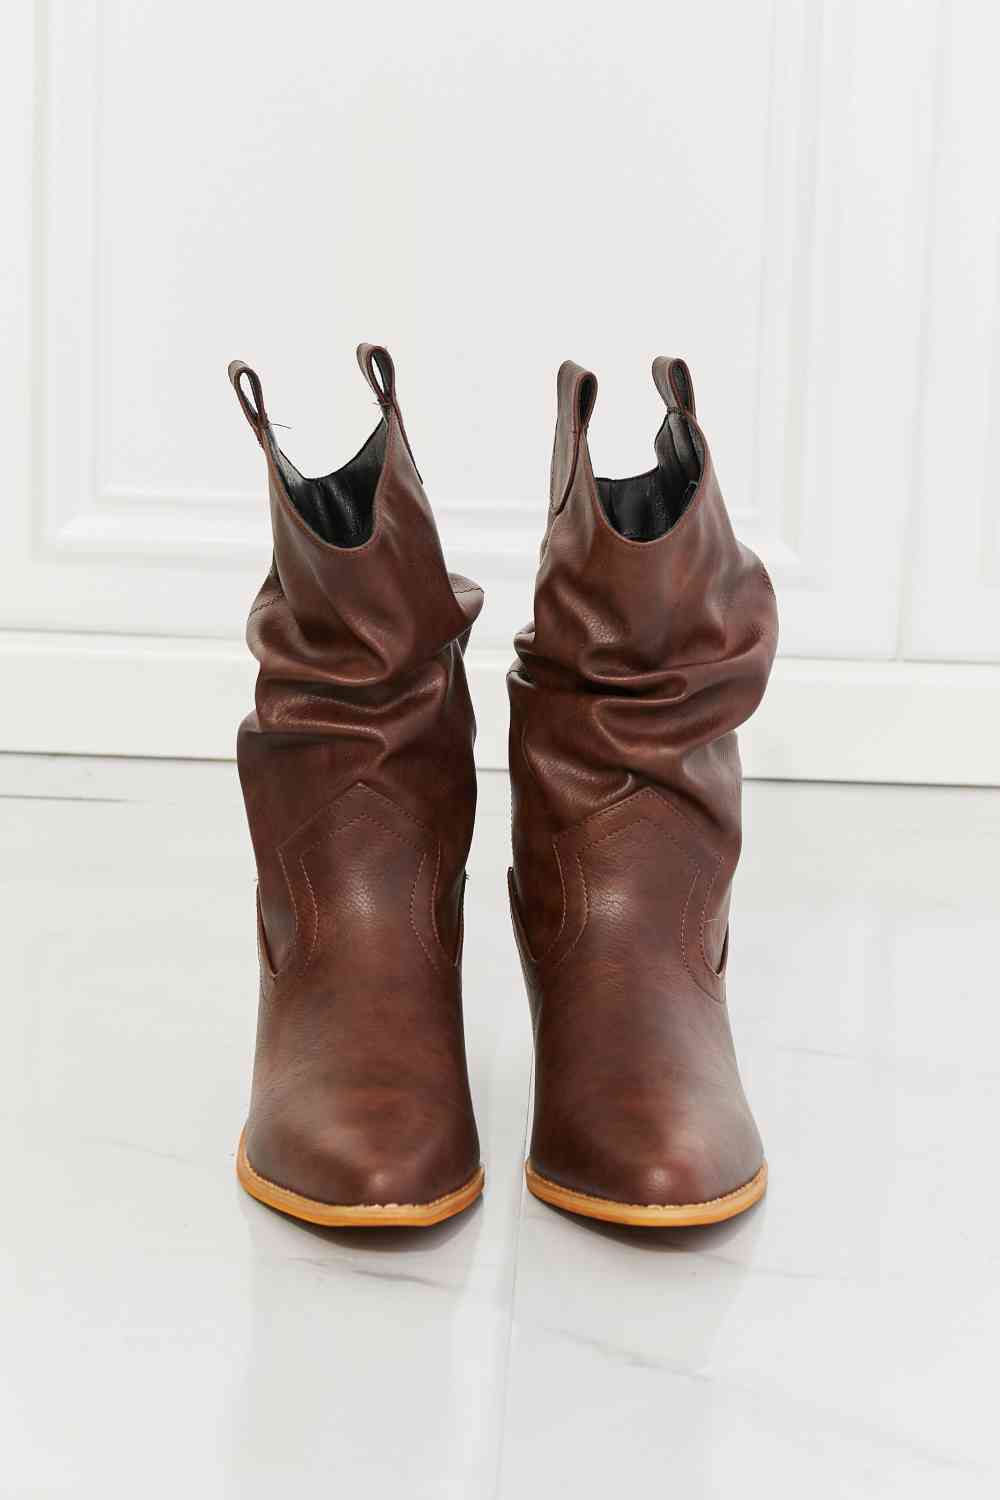 MMShoes Better in Texas Scrunch Cowboy Boots in Brown - lolaluxeshop